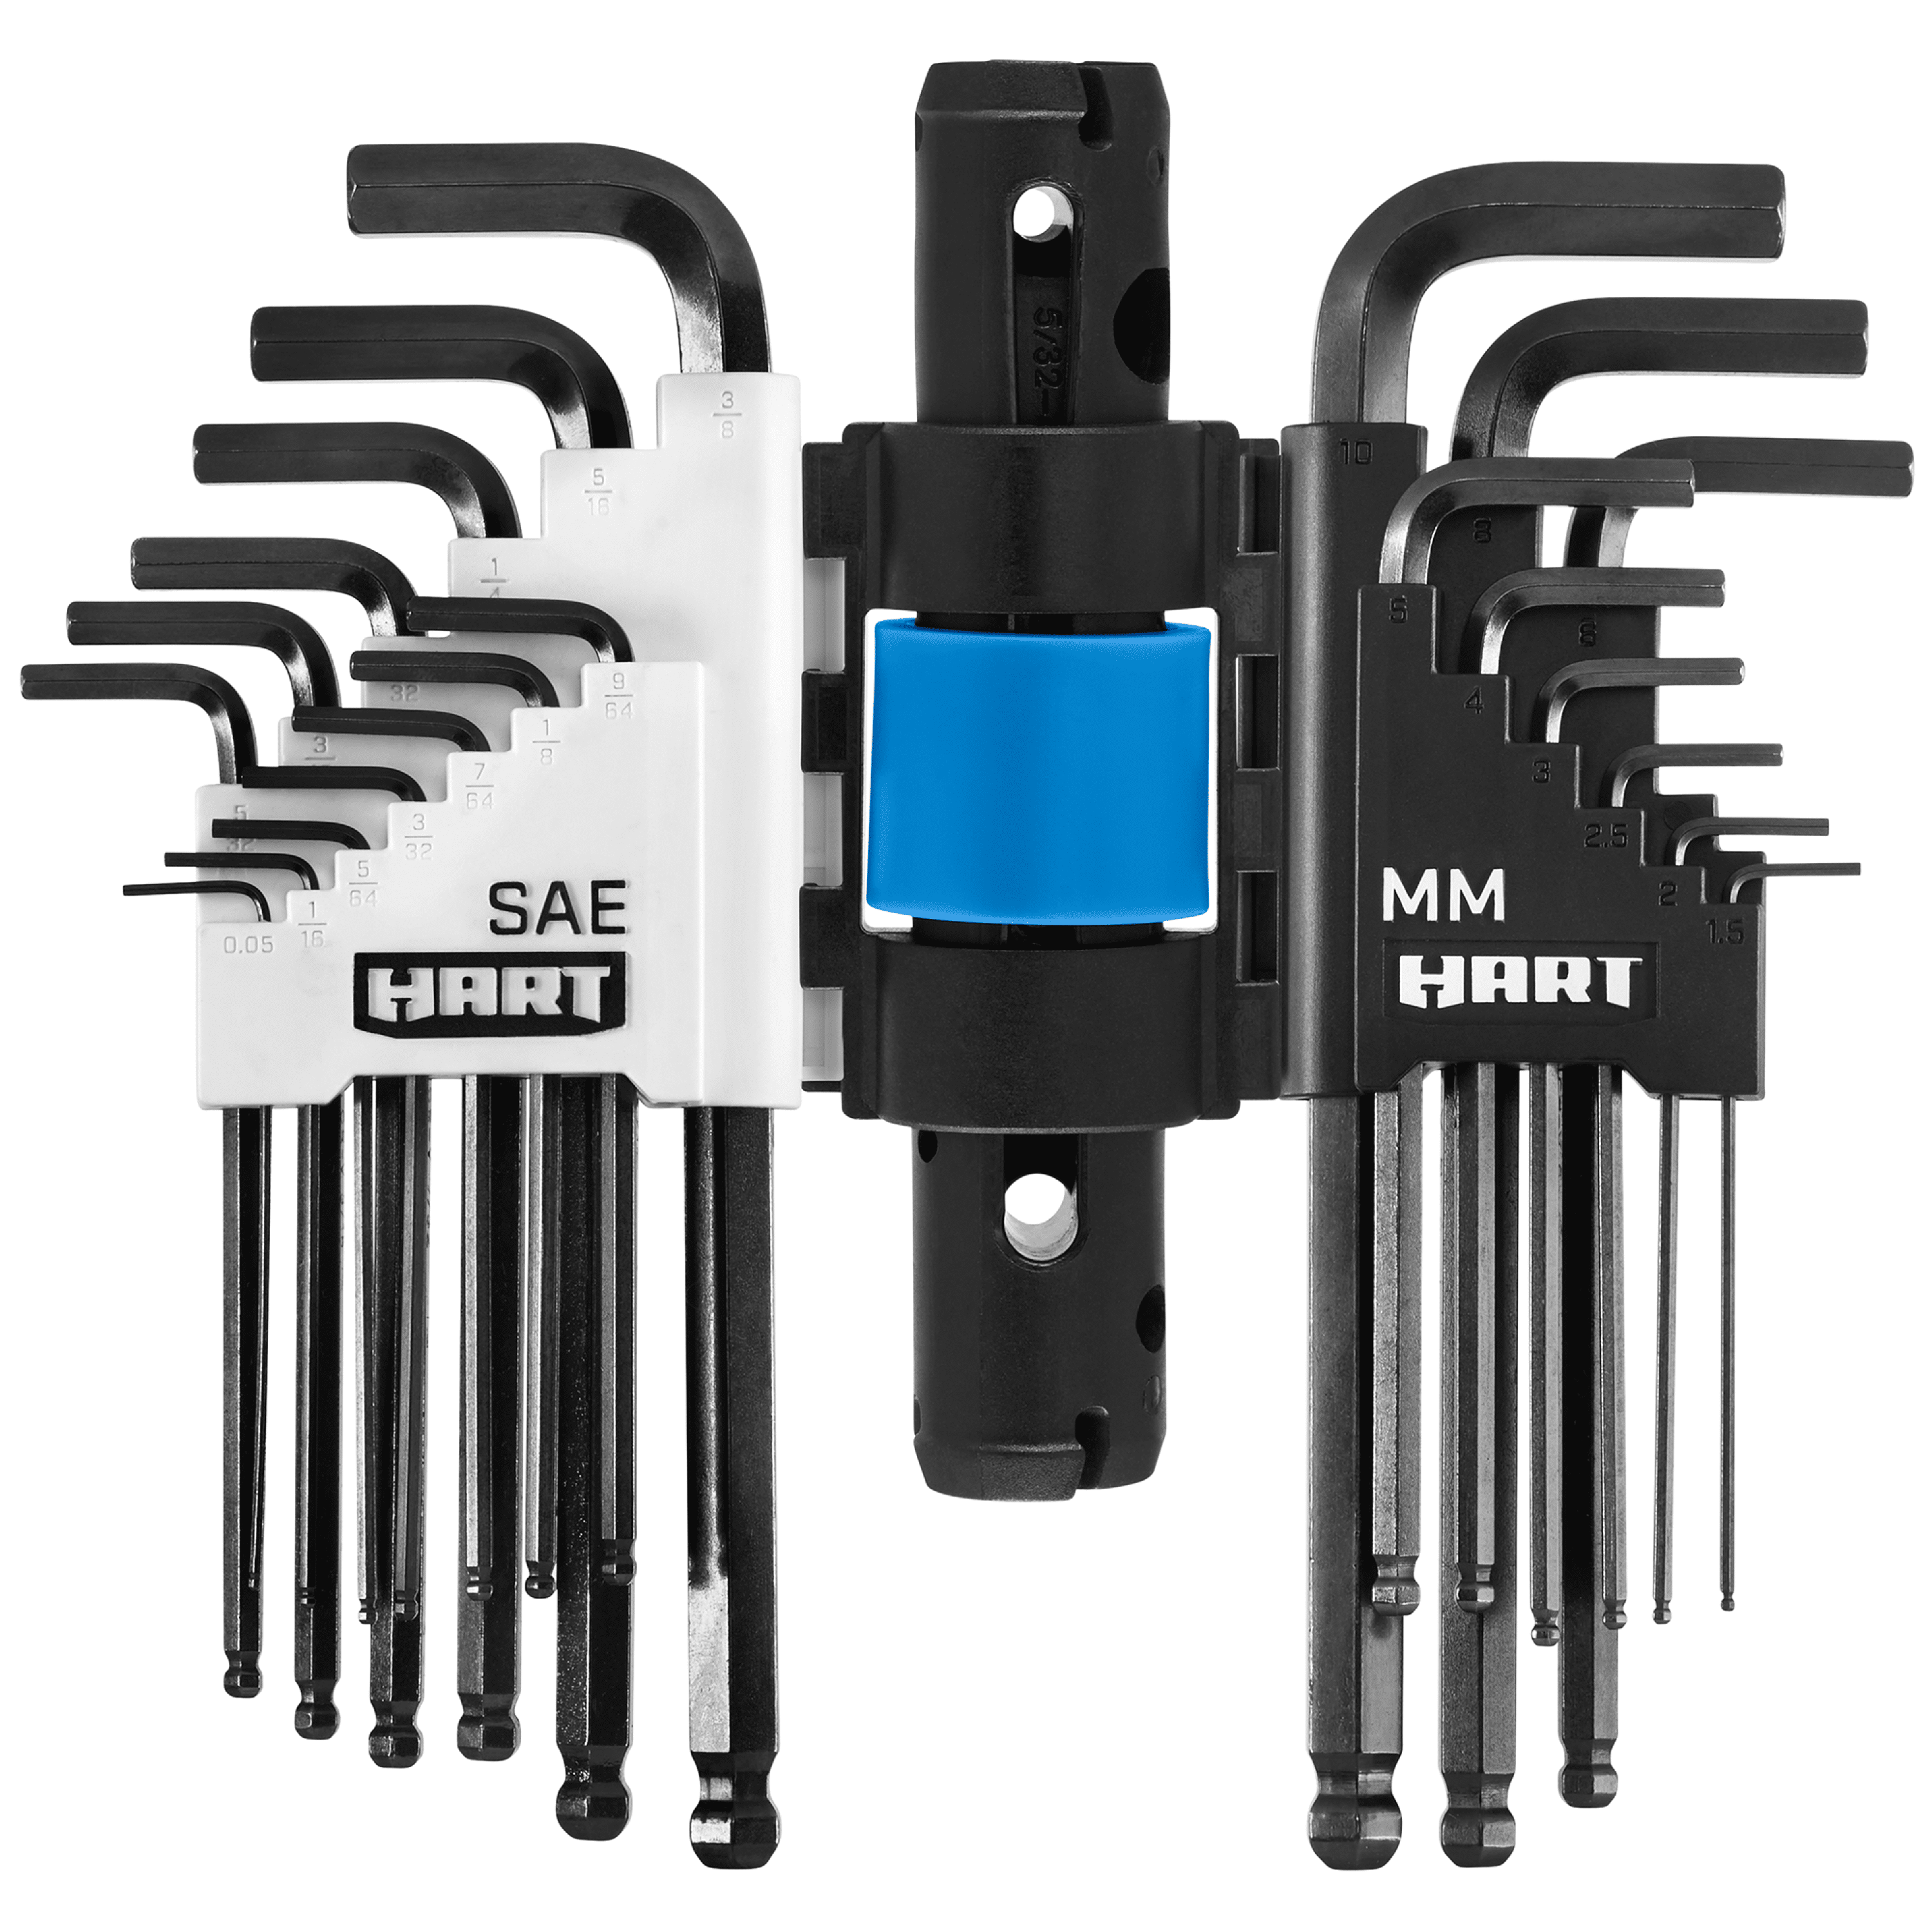 Everything You Need To Know About Hex Key Sets